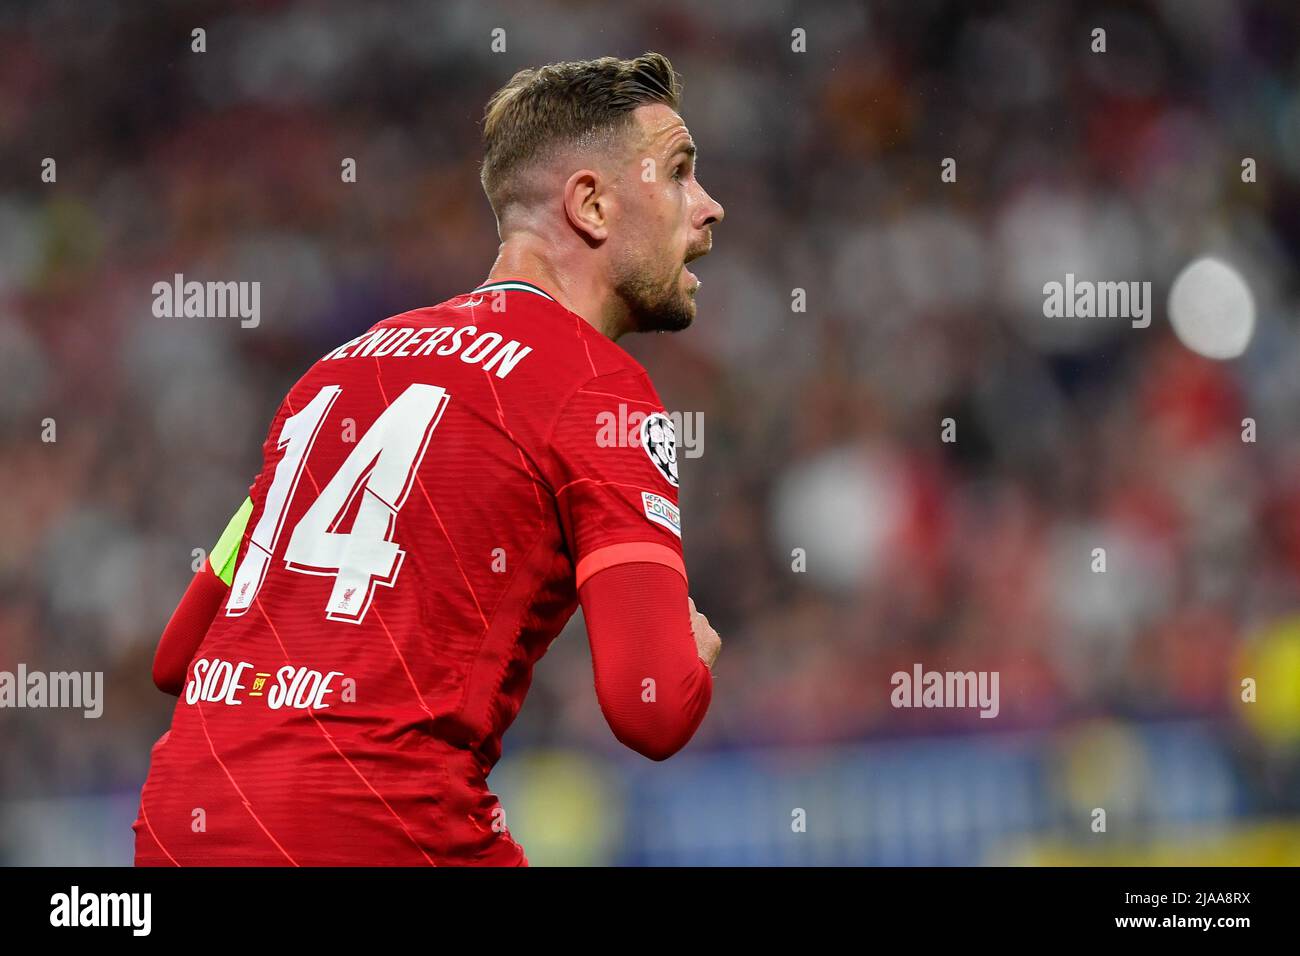 Paris, France. 28th May, 2022. Jordan Henderson (14) of Liverpool seen during the UEFA Champions League final between Liverpool and Real Madrid at the Stade de France in Paris. (Photo Credit: Gonzales Photo/Alamy Live News Stock Photo